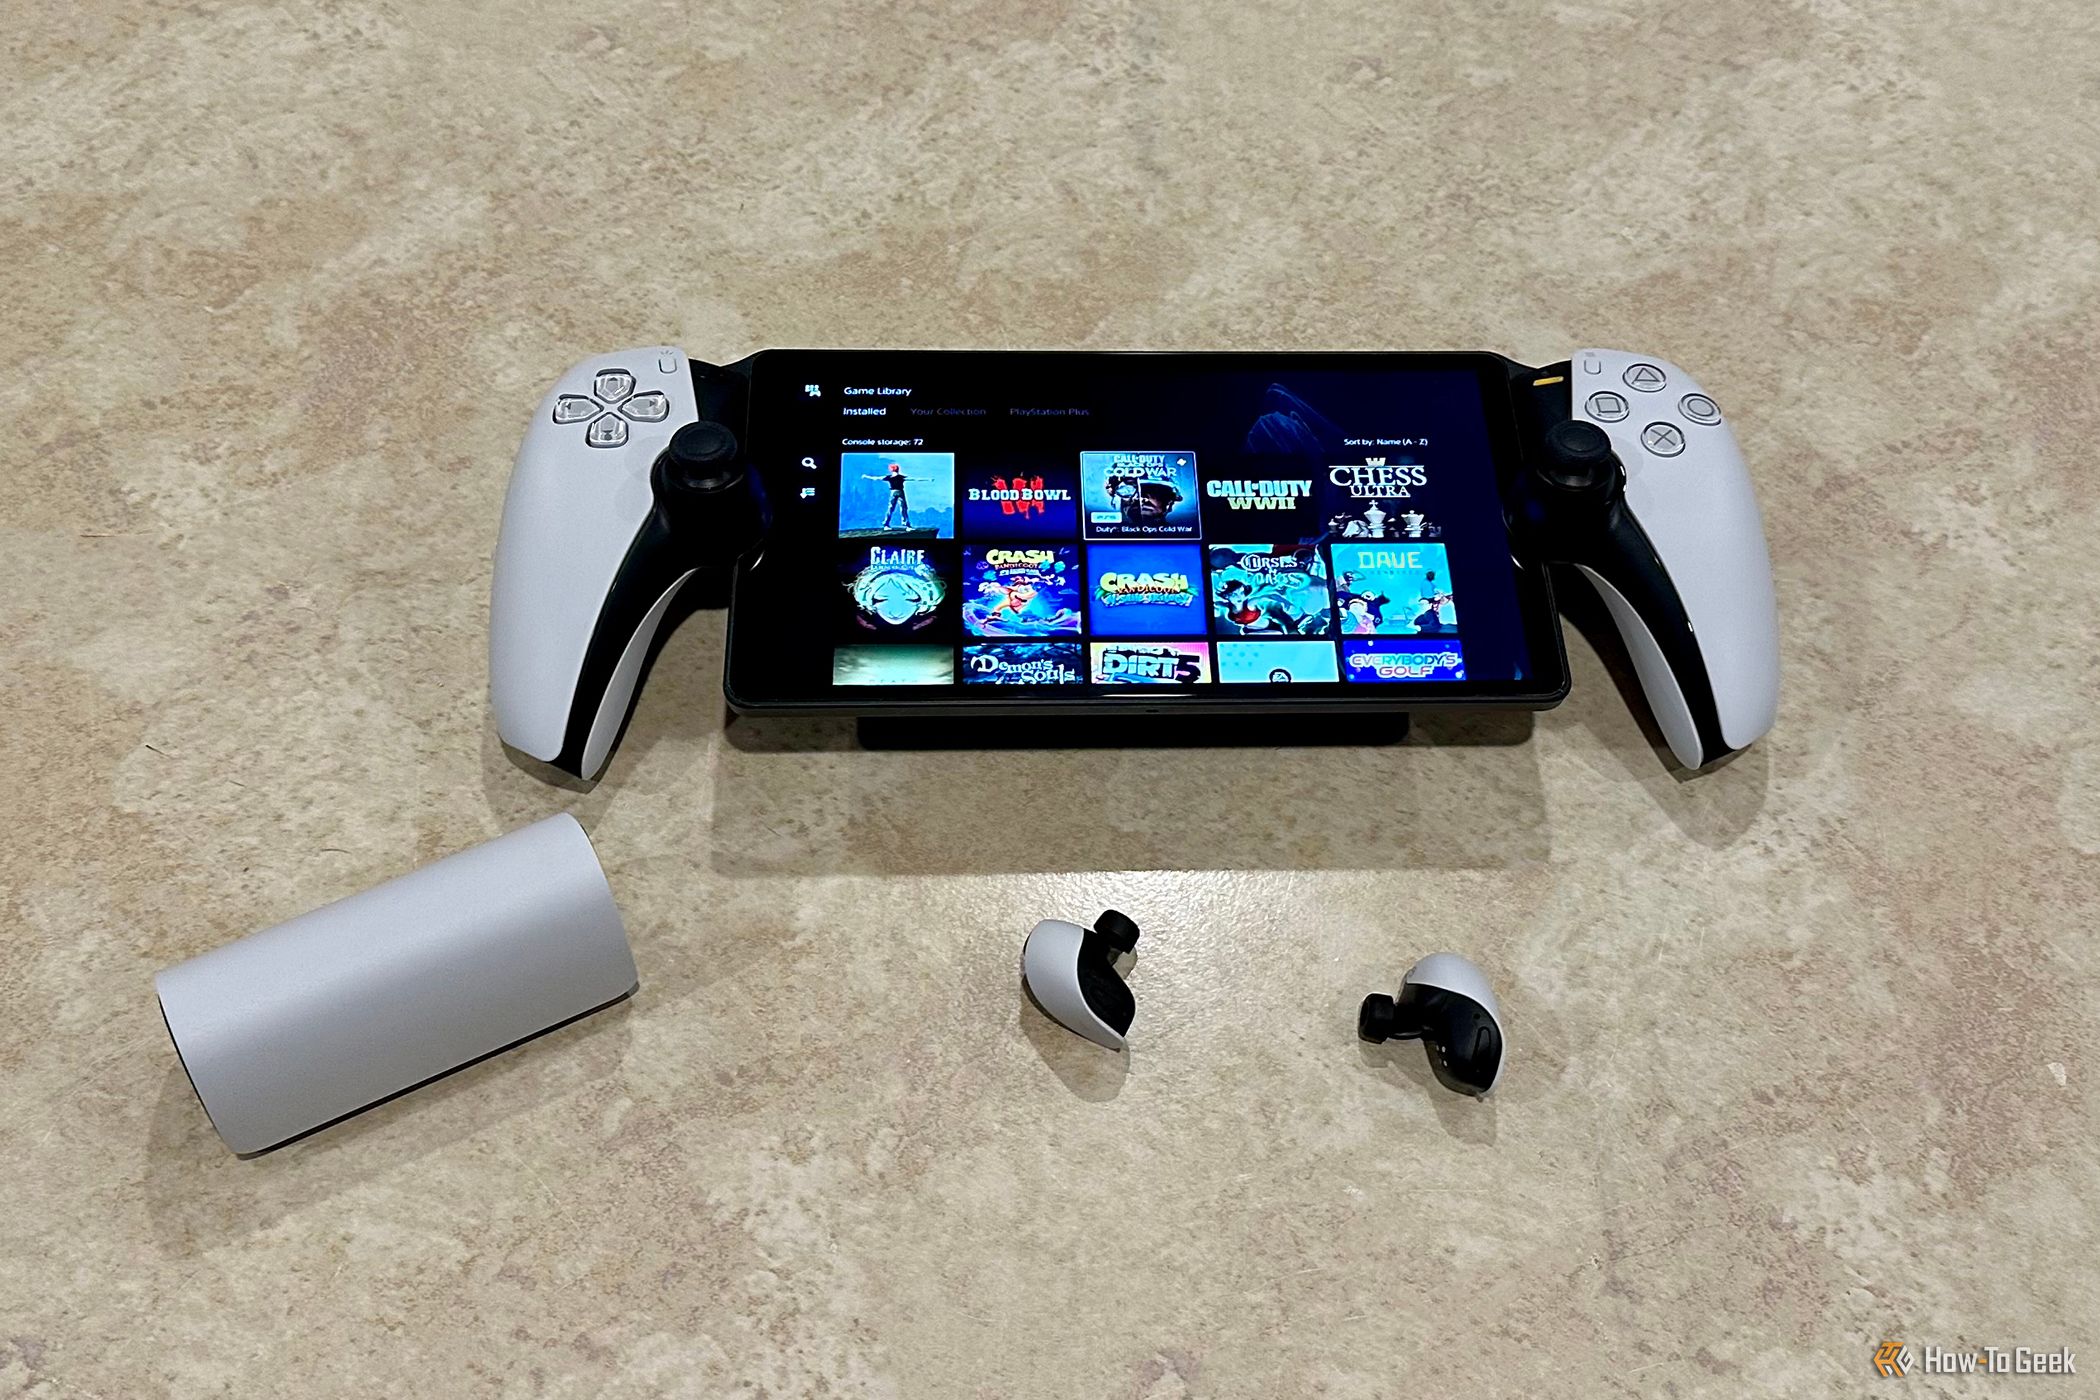 Sony PlayStation Portal, Pulse Explore Wireless Earbuds, and Charging Case on a tabletop